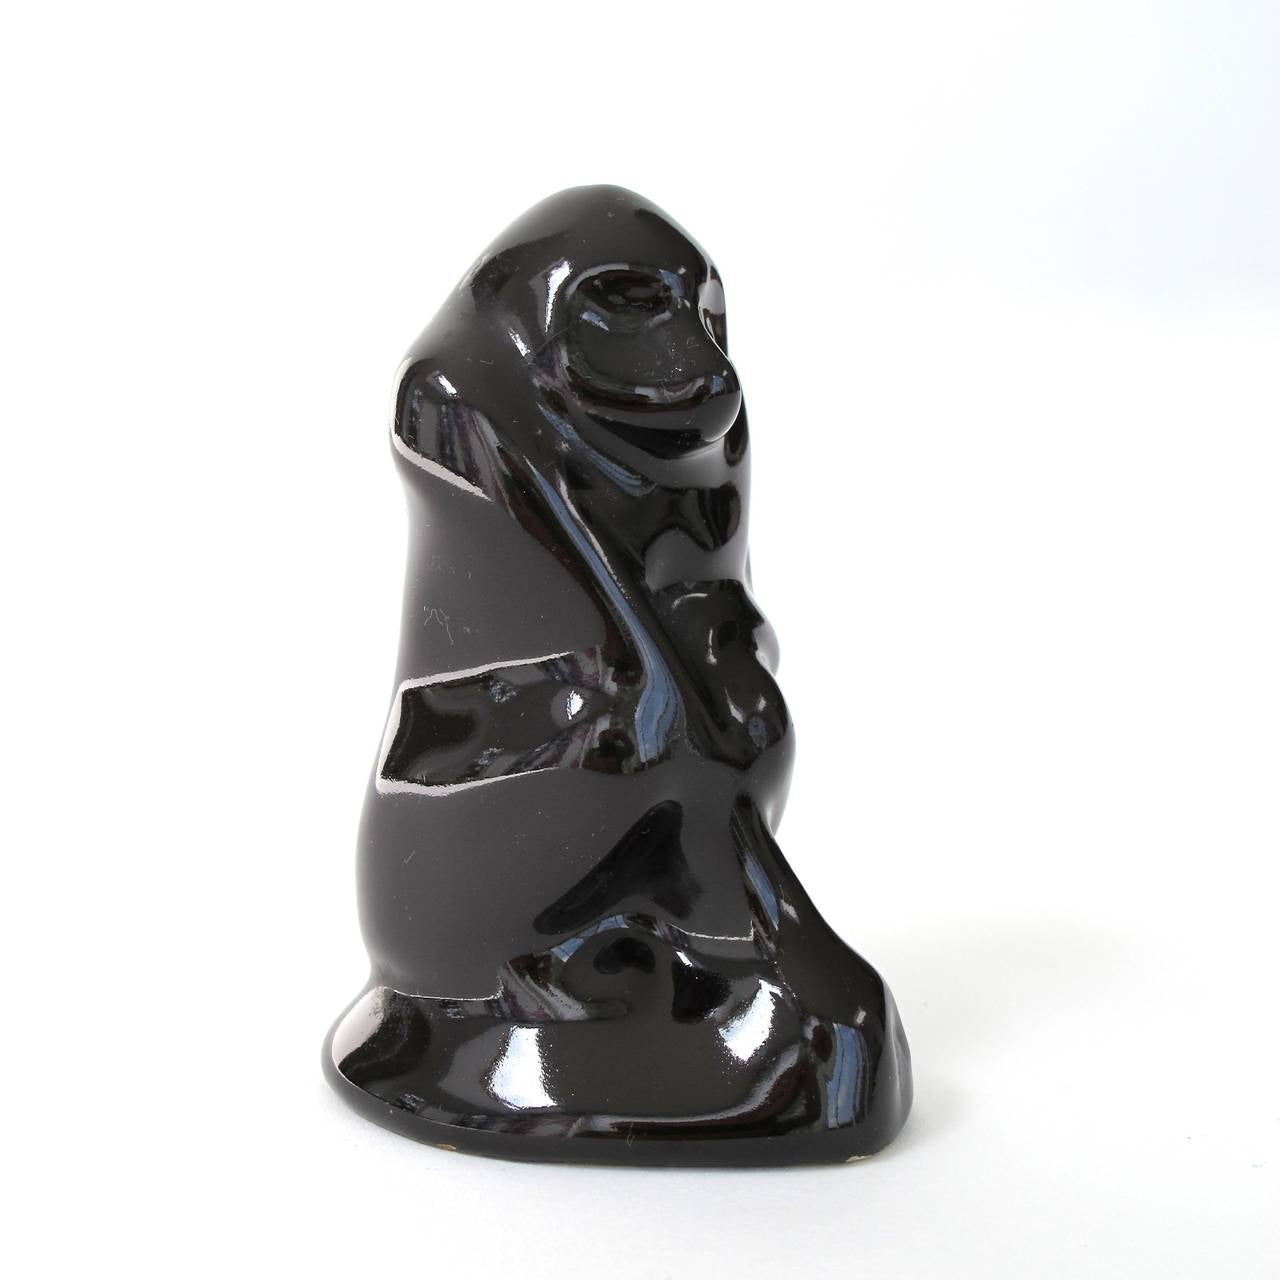 Fine and very rare black glazed earthenware sculpture of a seated monkey by Hildo Krop for the Dutch pottery manufacturer ESKAF. The piece is in an excellent condition and signed on the bottom with a manufacturer mark and the etched model numbers